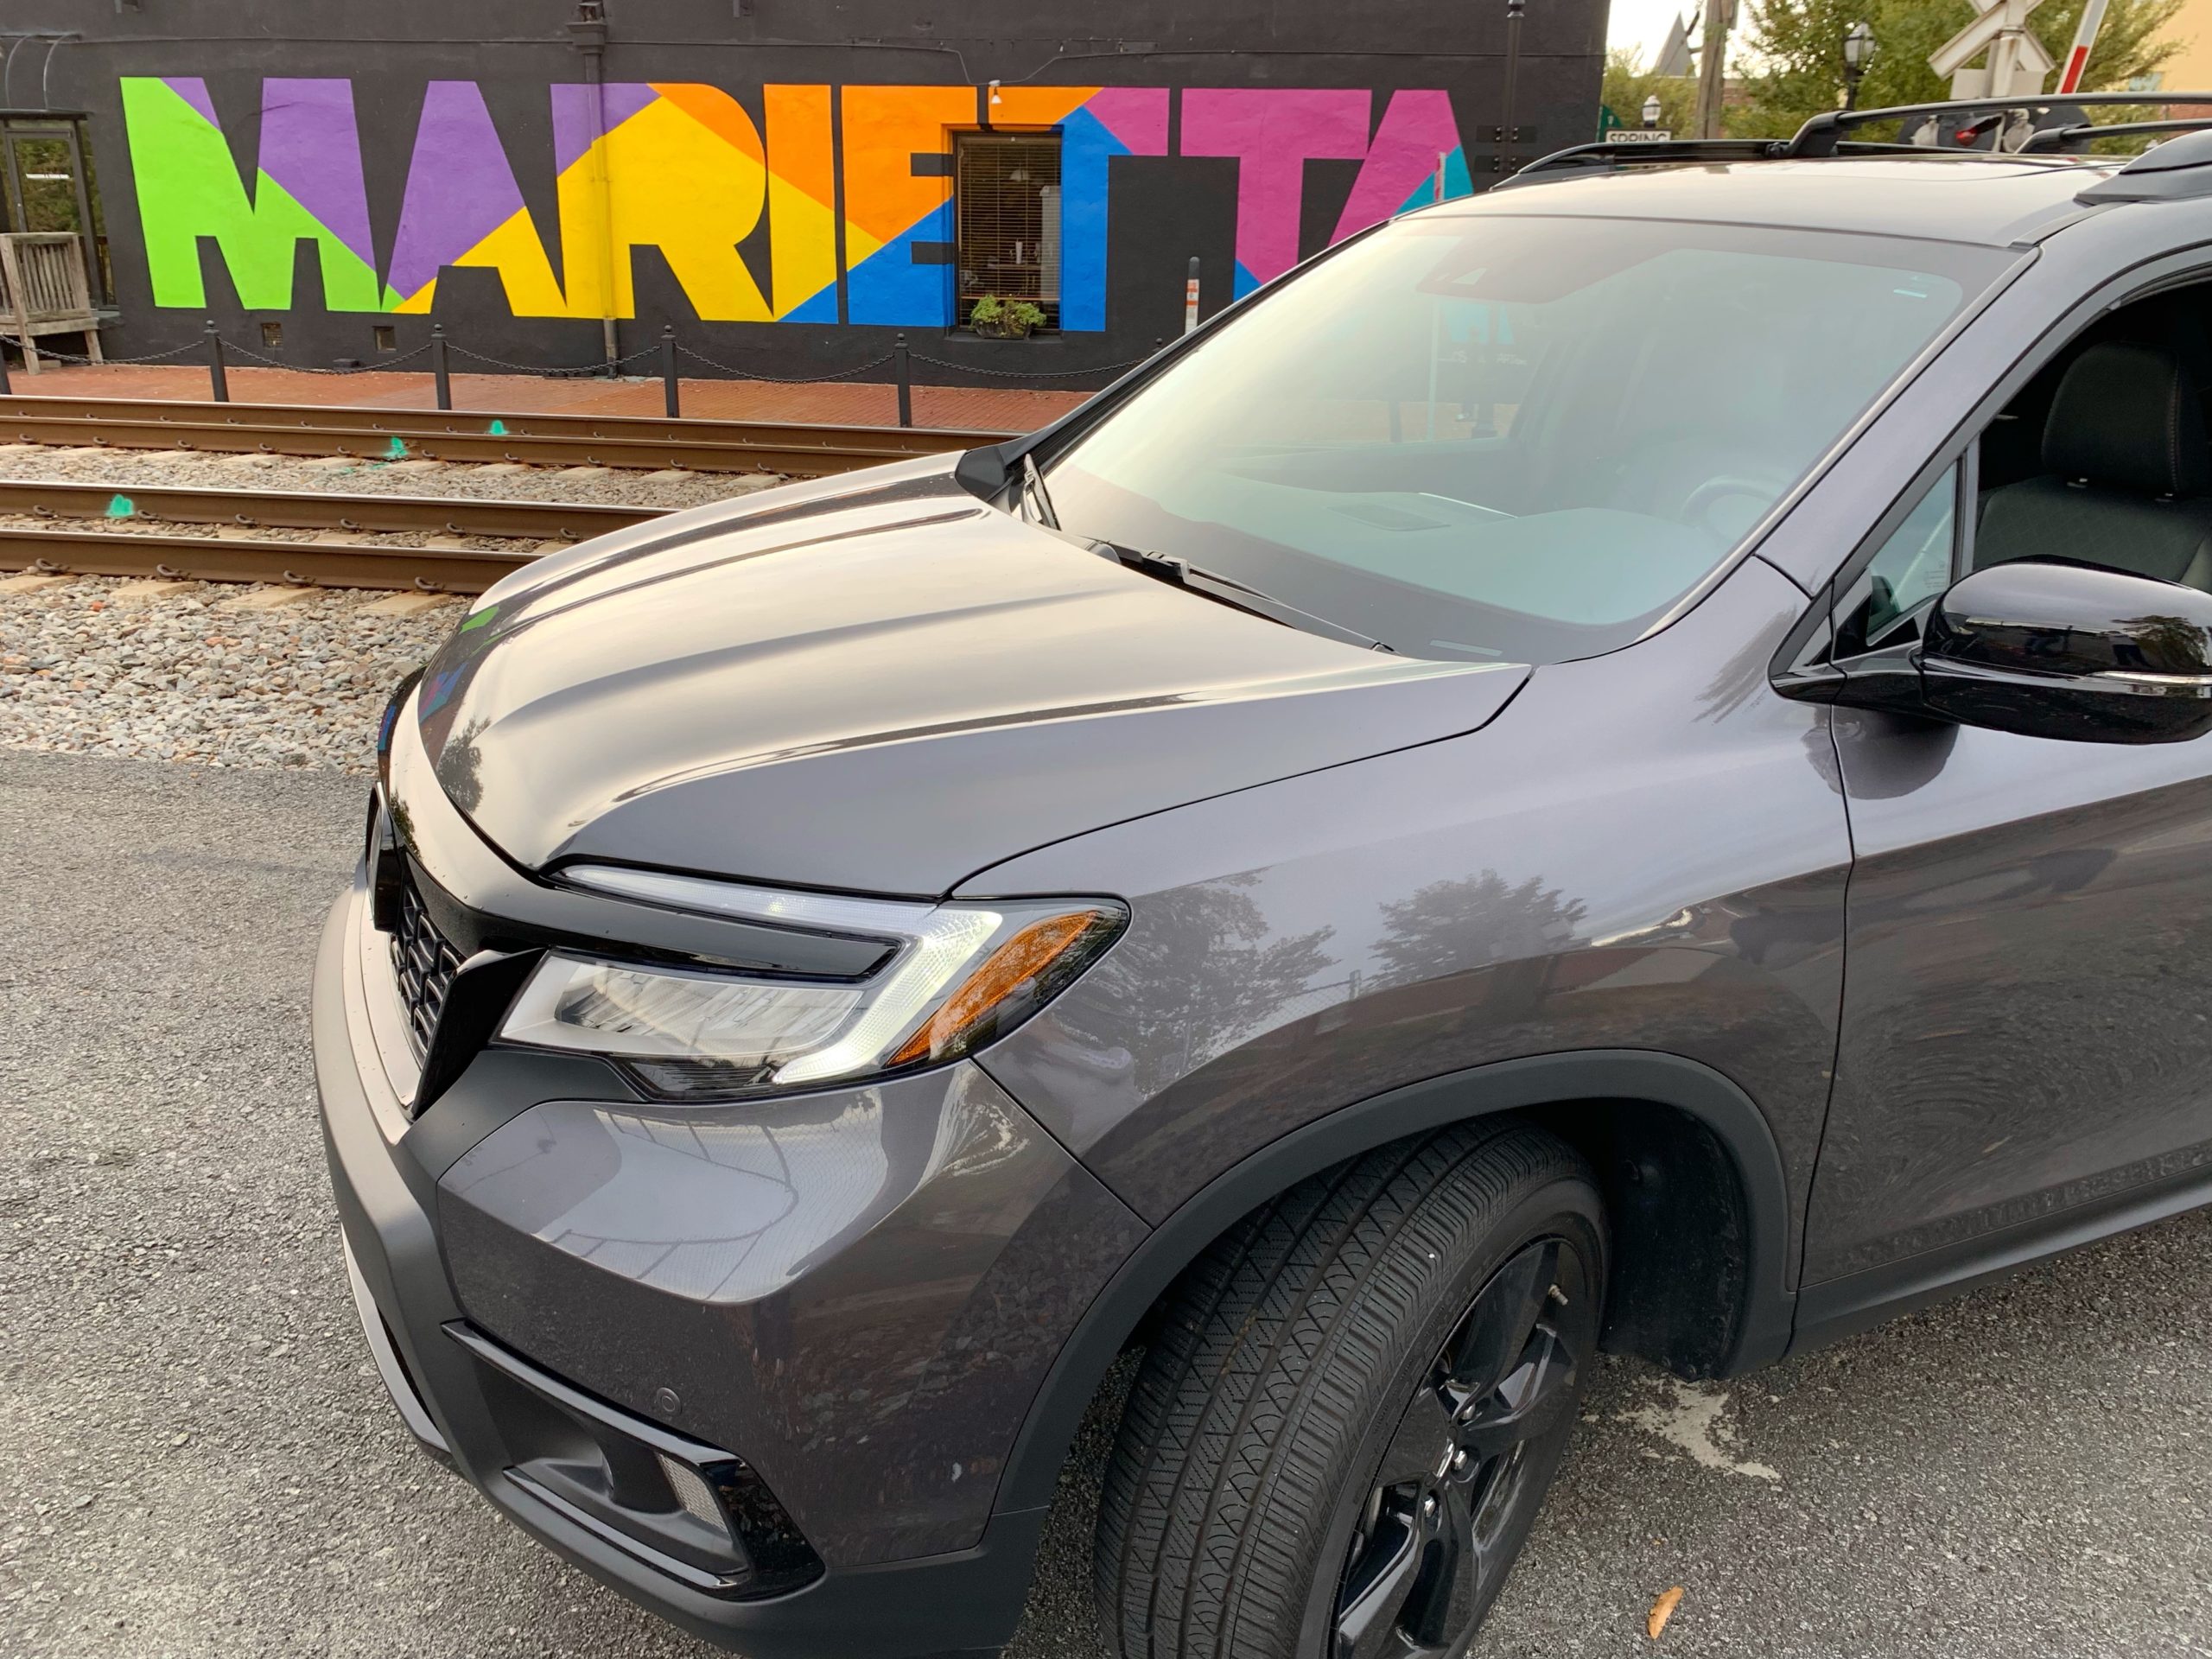 2020 Honda Passport, 2020 Honda Passport Review, Honda Passport Mom Review